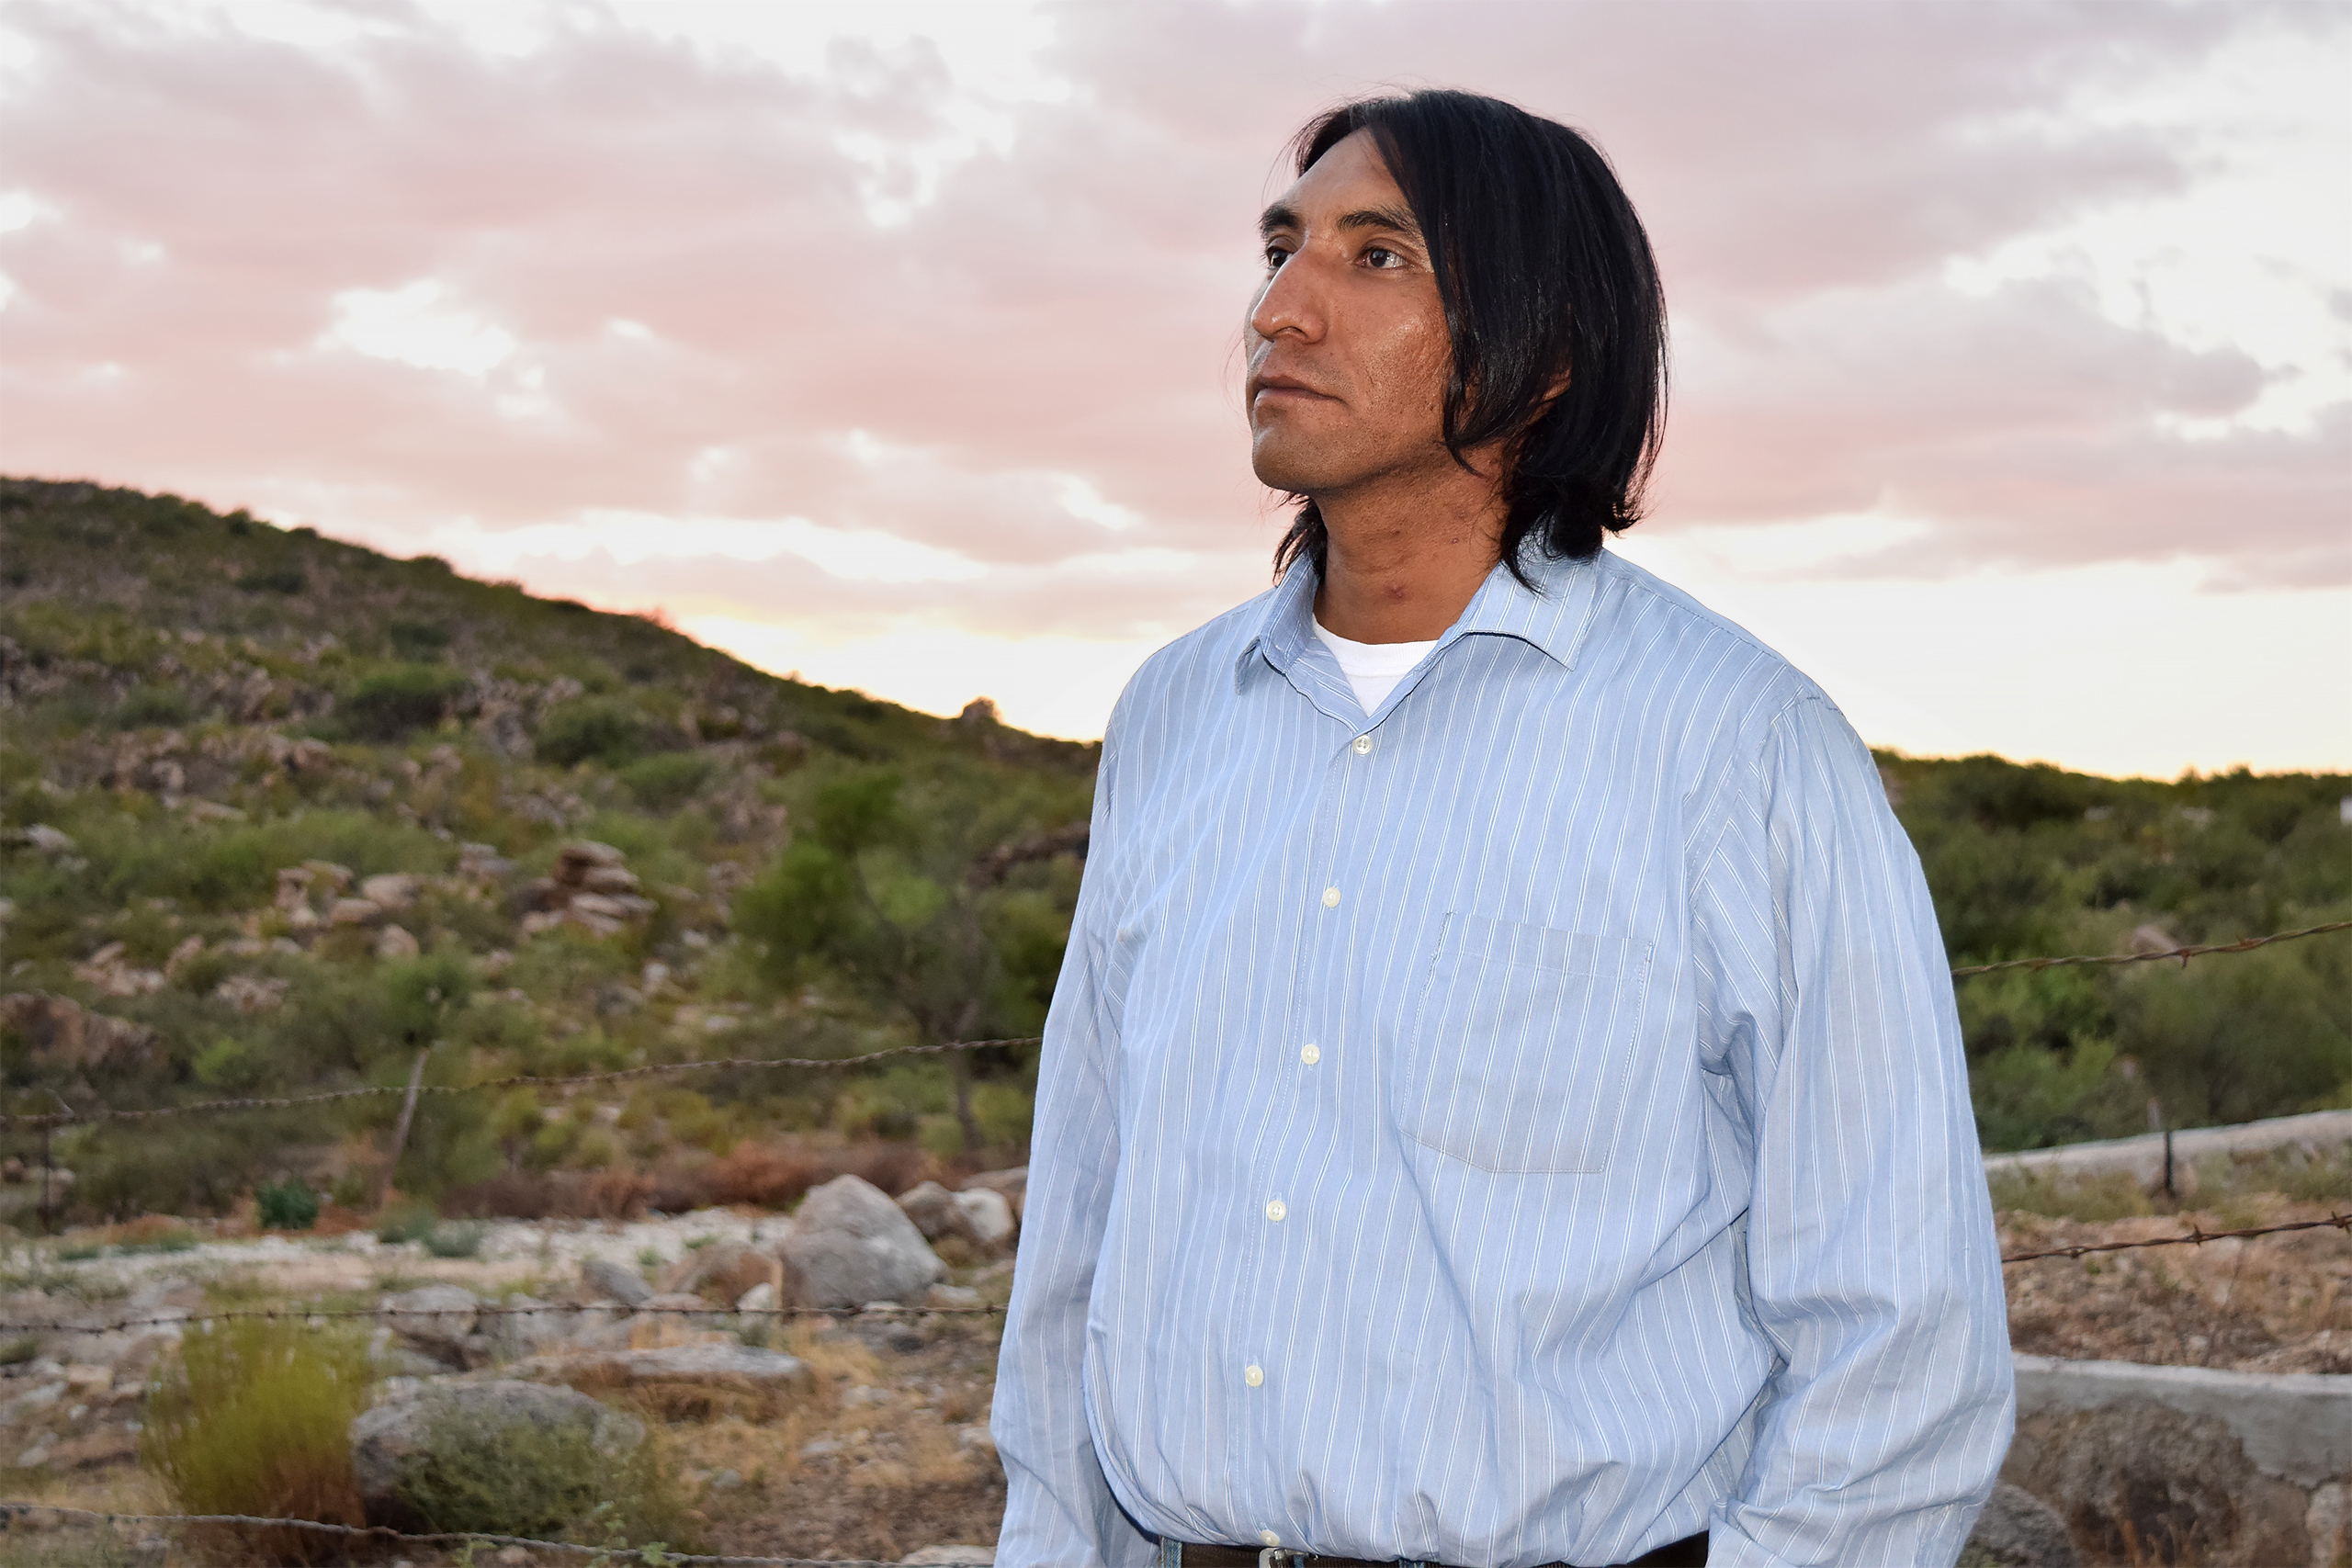 Matias Valenzuela, an Indigenous leader of the Tohono O'odham people, poses